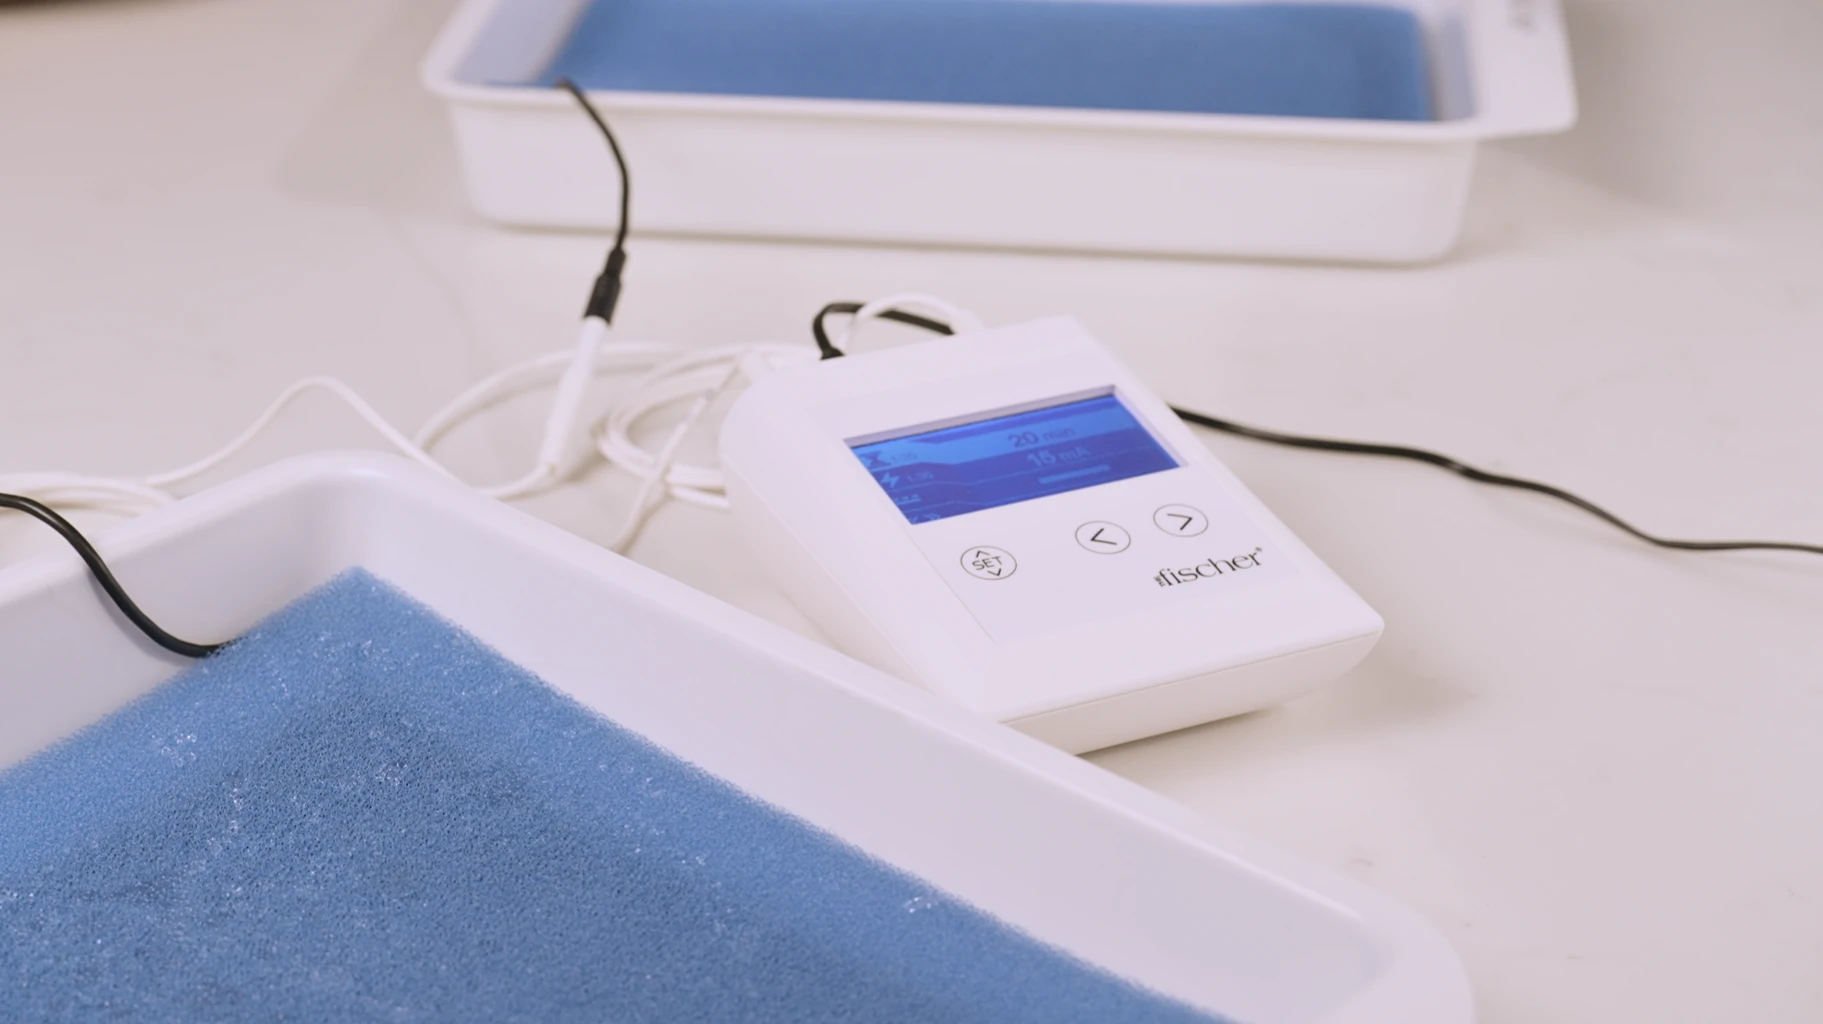 A photograph highlighting RA Fischer Co.'s original metal-free iontophoresis device, "The Fischer," specifically designed to treat hyperhidrosis, is displayed on a level surface. This device is seamlessly connected to two white water bath trays, each containing blue pH-balancing foam and featuring silicone-graphite electrodes, all neatly arranged atop a white table.